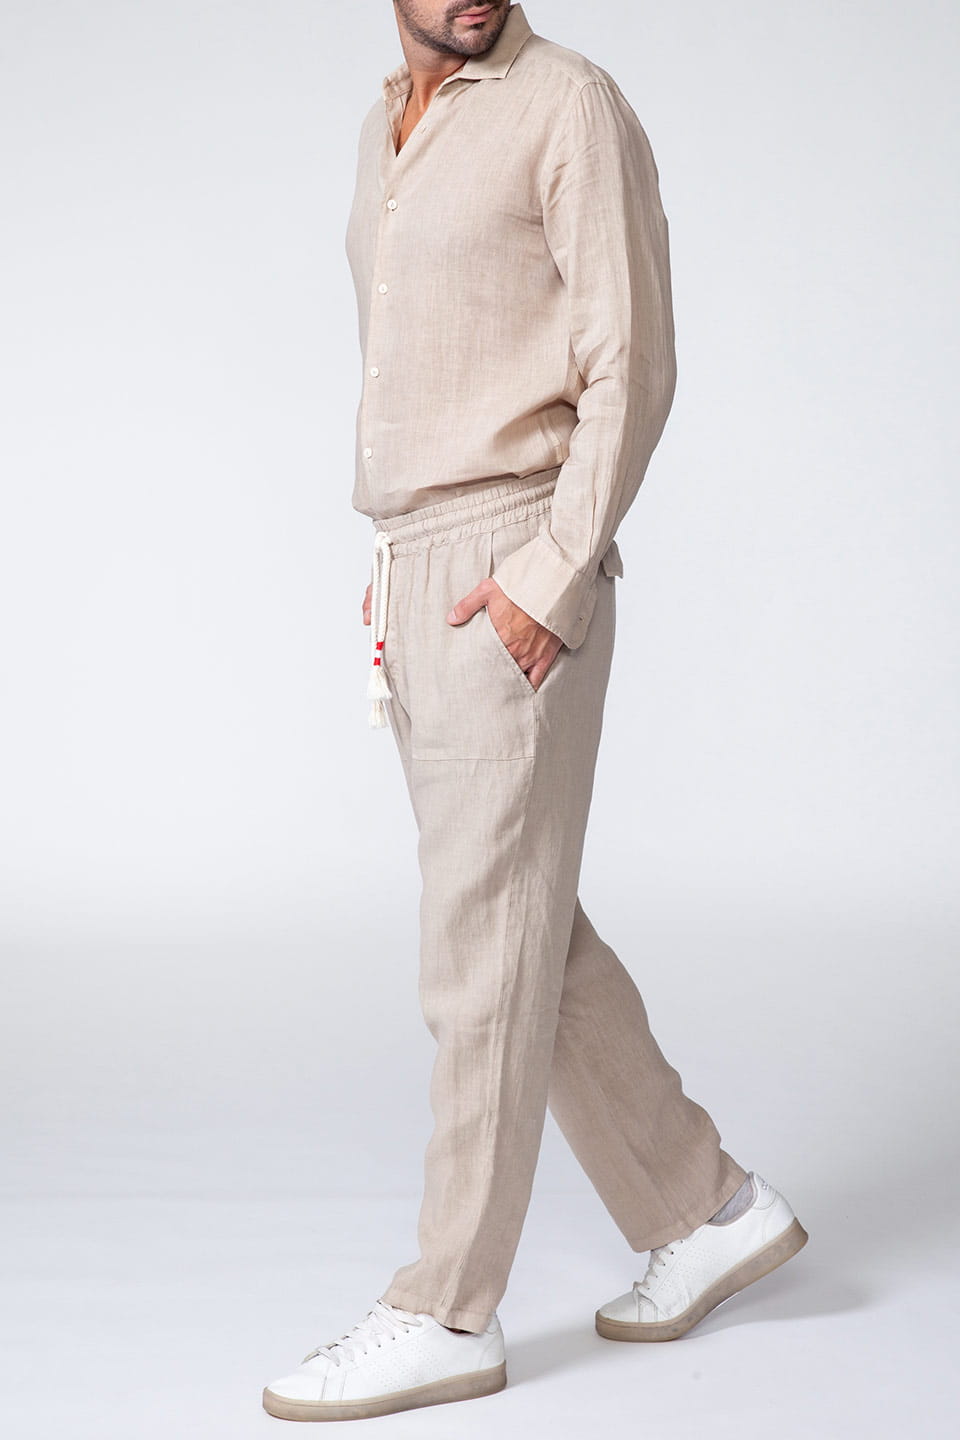 Thumbnail for Product gallery 6, Italian stylist man linen trousers in beige color. with beige shirt in a full body product view